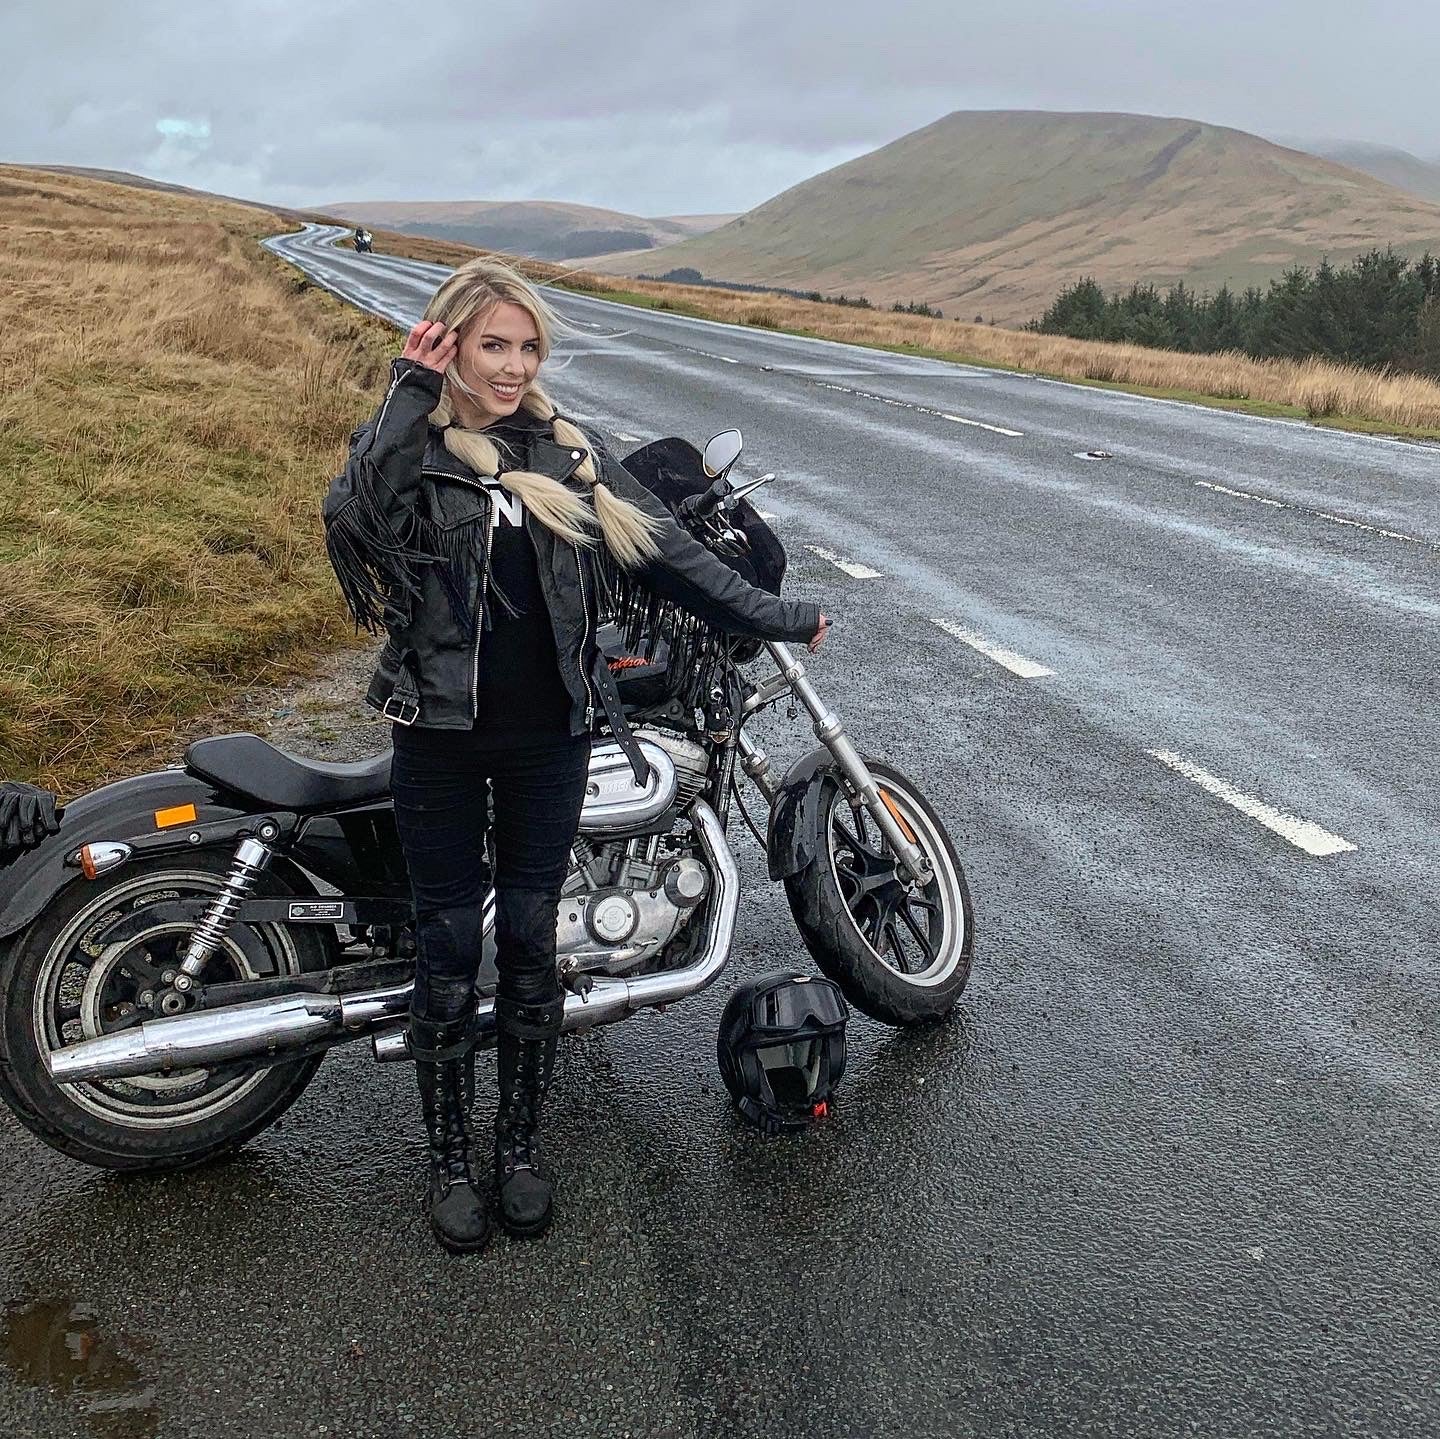 Lady Harley standing in the rain next to her motorcycle